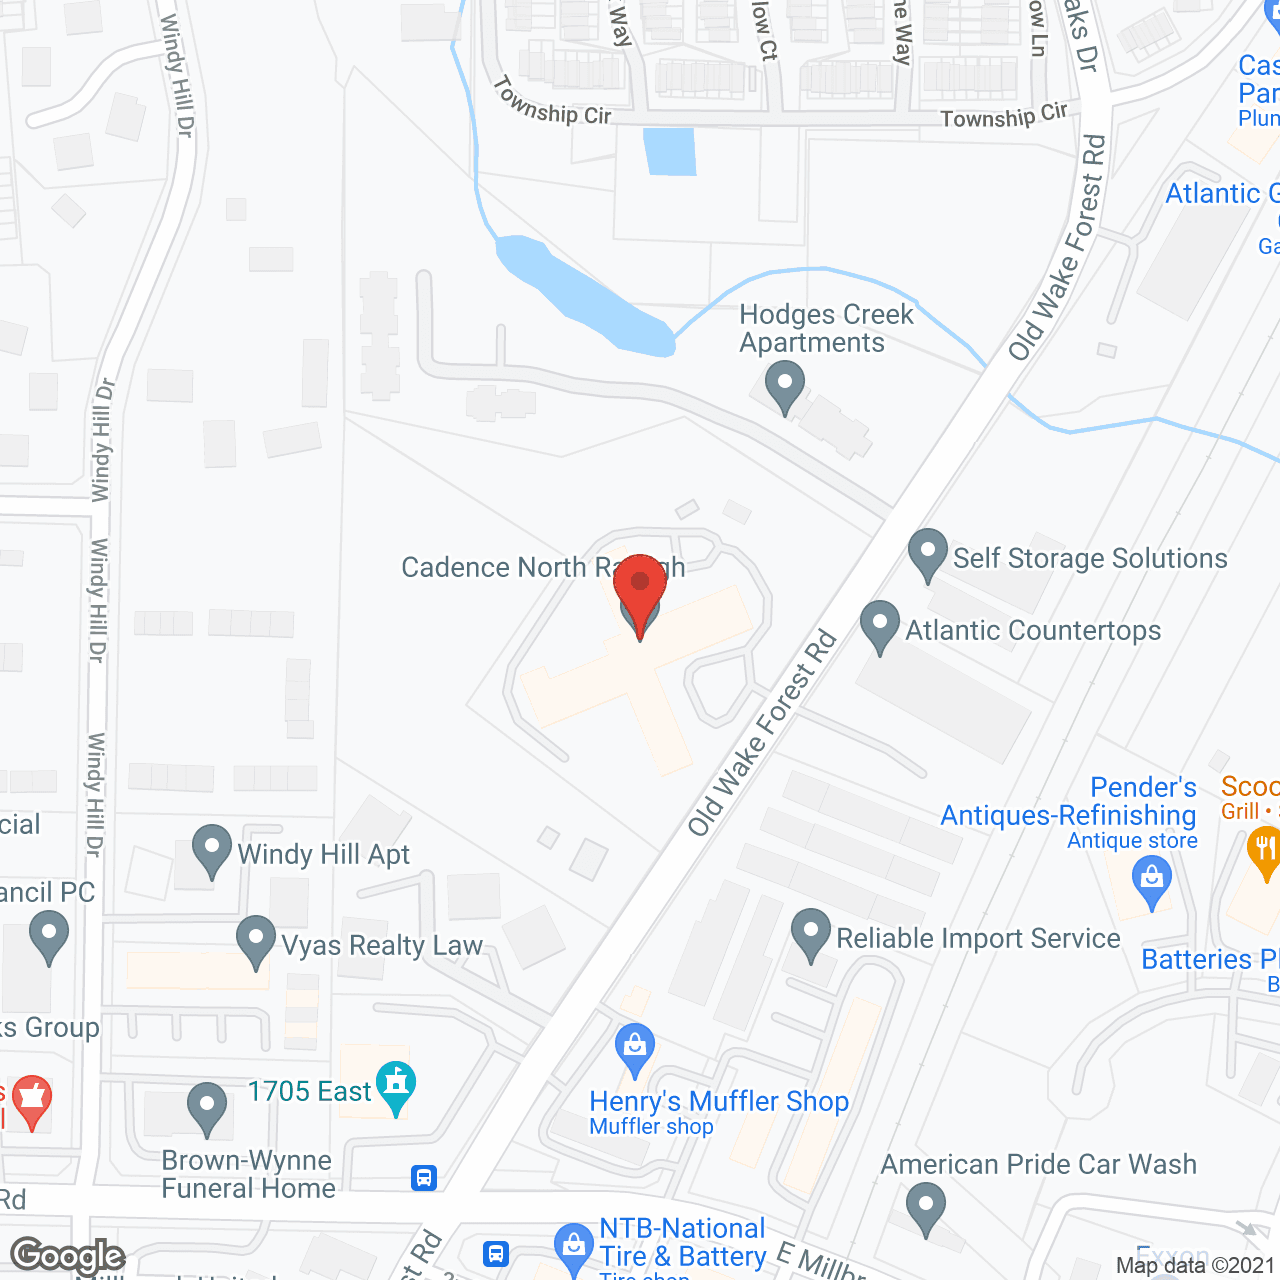 Cadence at North Raleigh by Cogir in google map